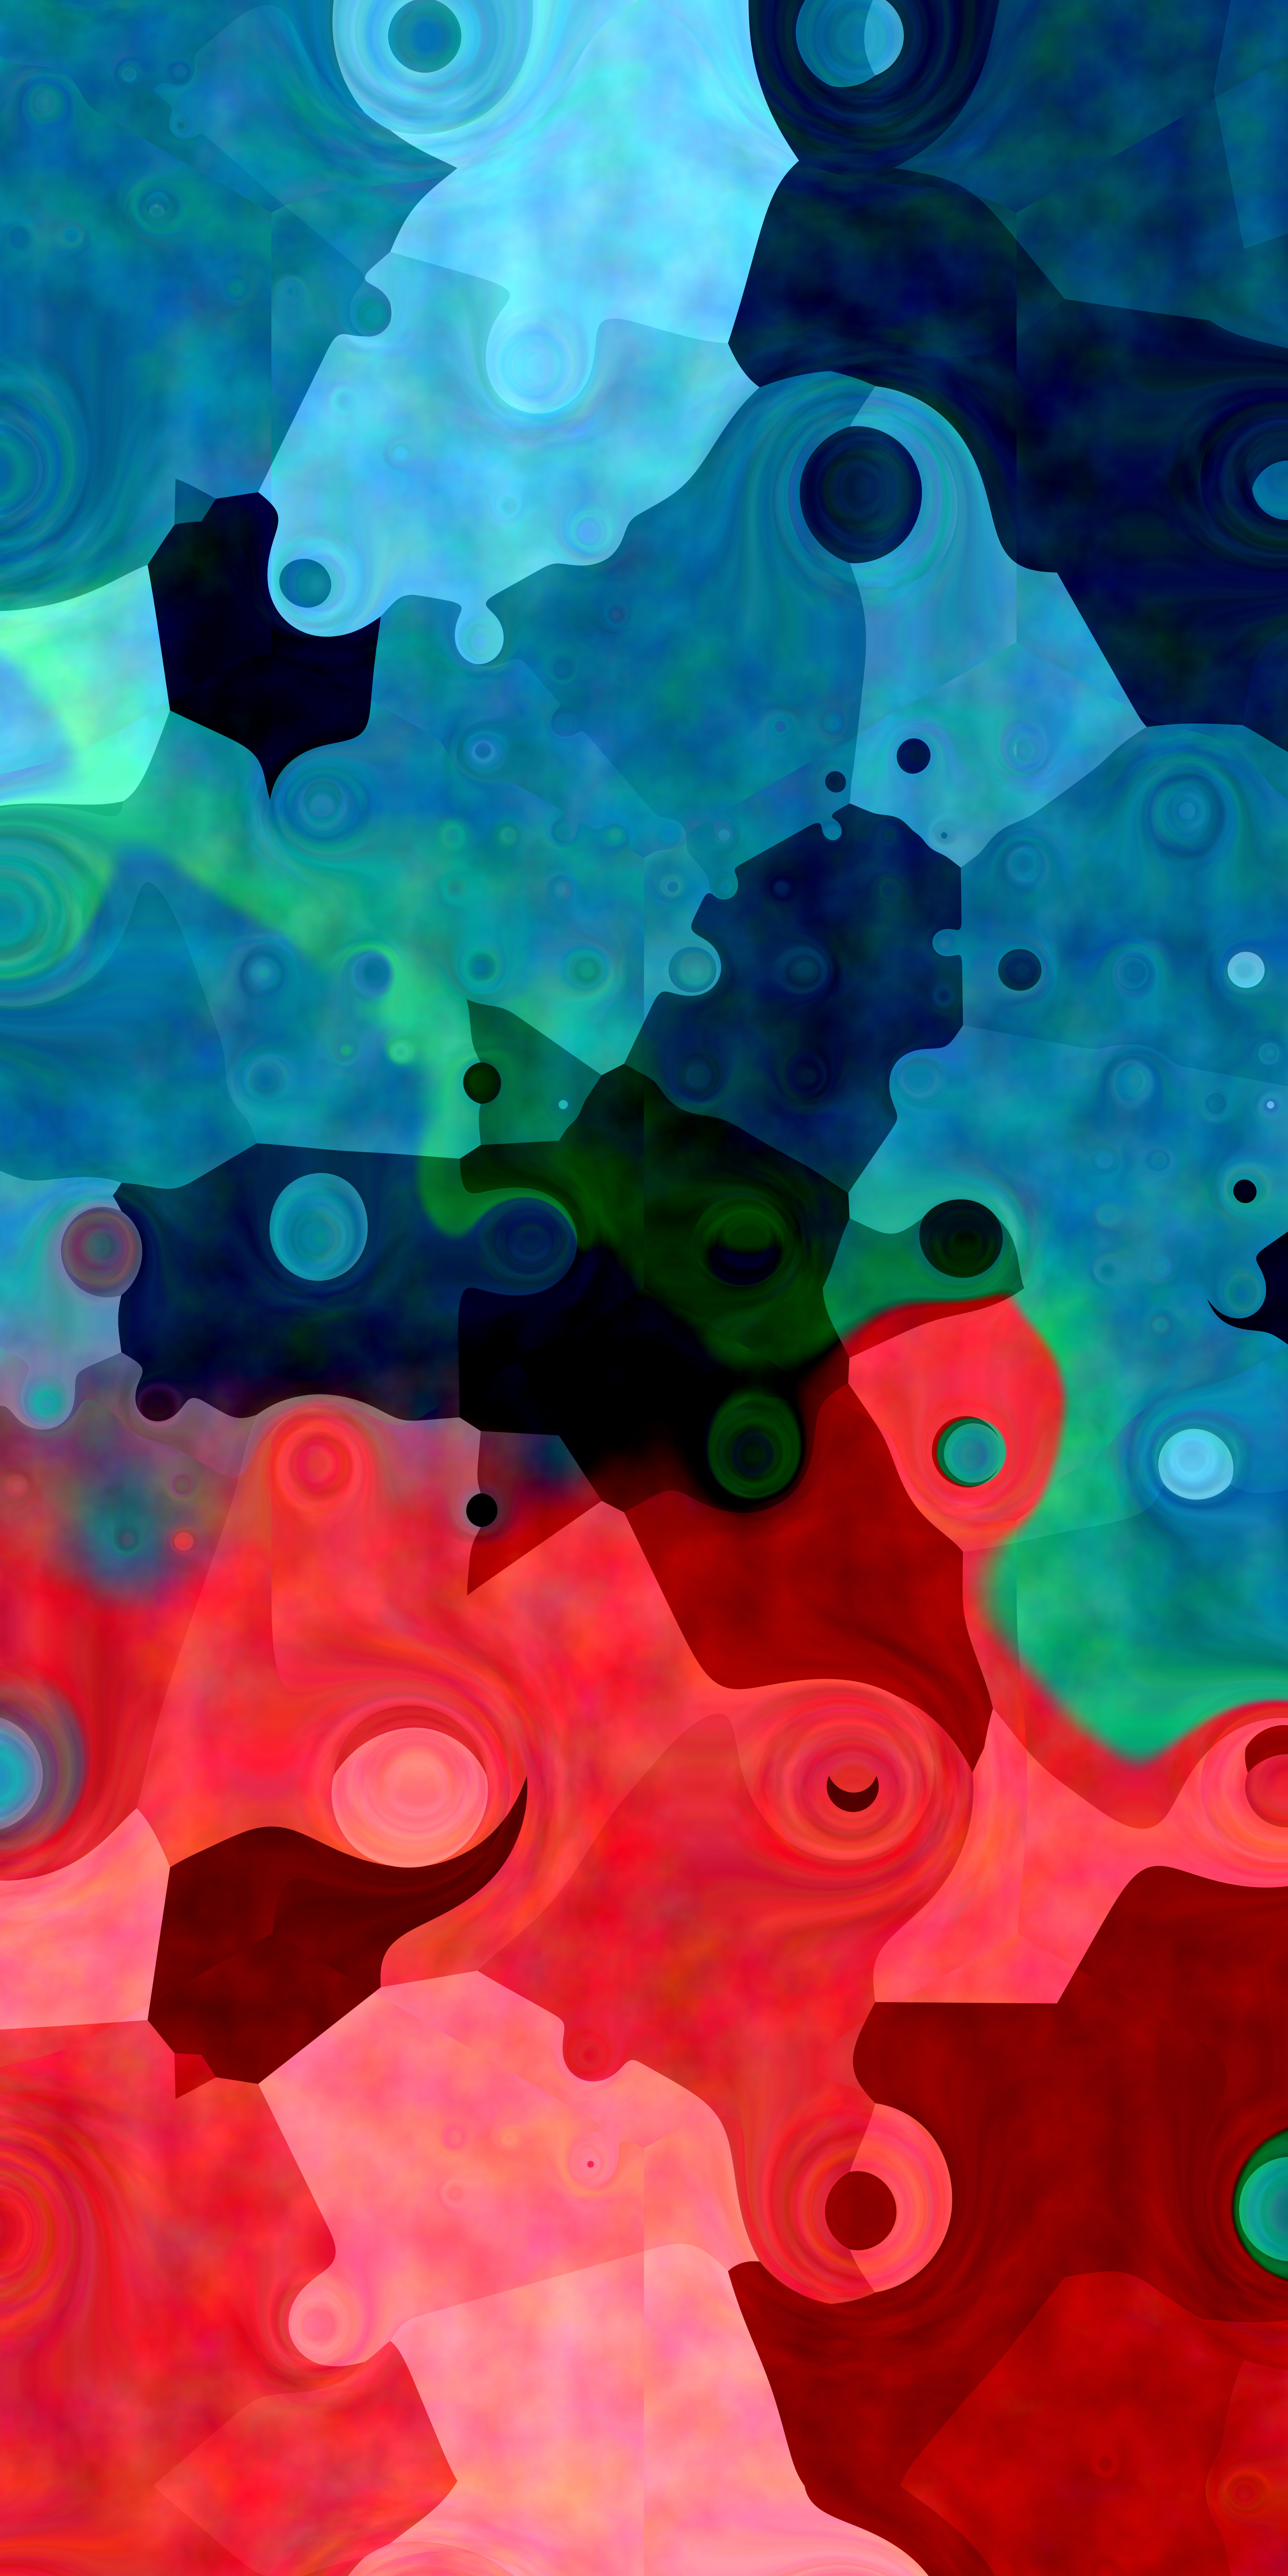 stains, abstract, multicolored, motley, spots, digital